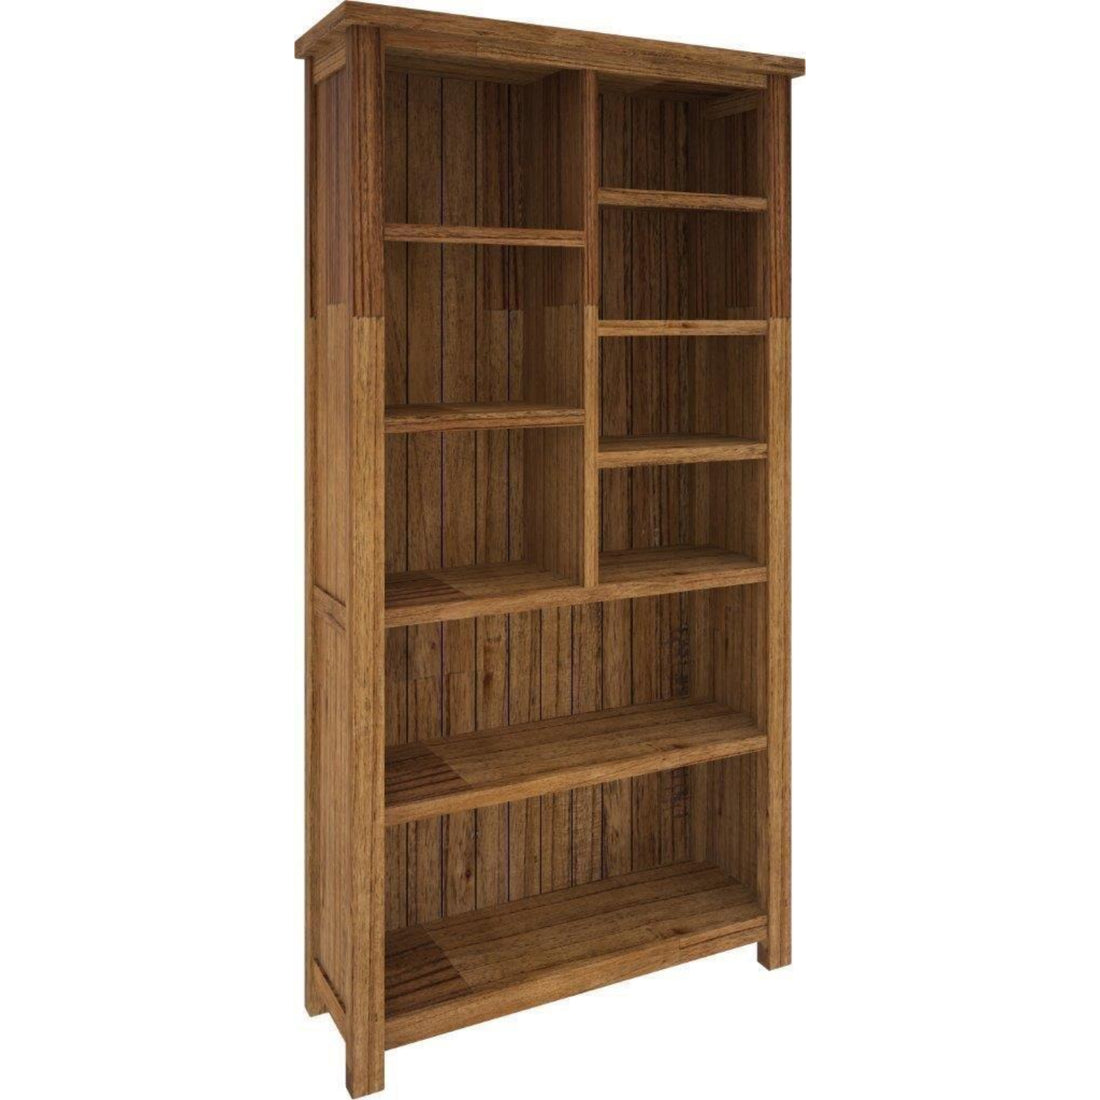 Birdsville Bookshelf Bookcase Display Unit Solid Mt Ash Timber Wood - Brown-Bookcases &amp; Shelves-PEROZ Accessories